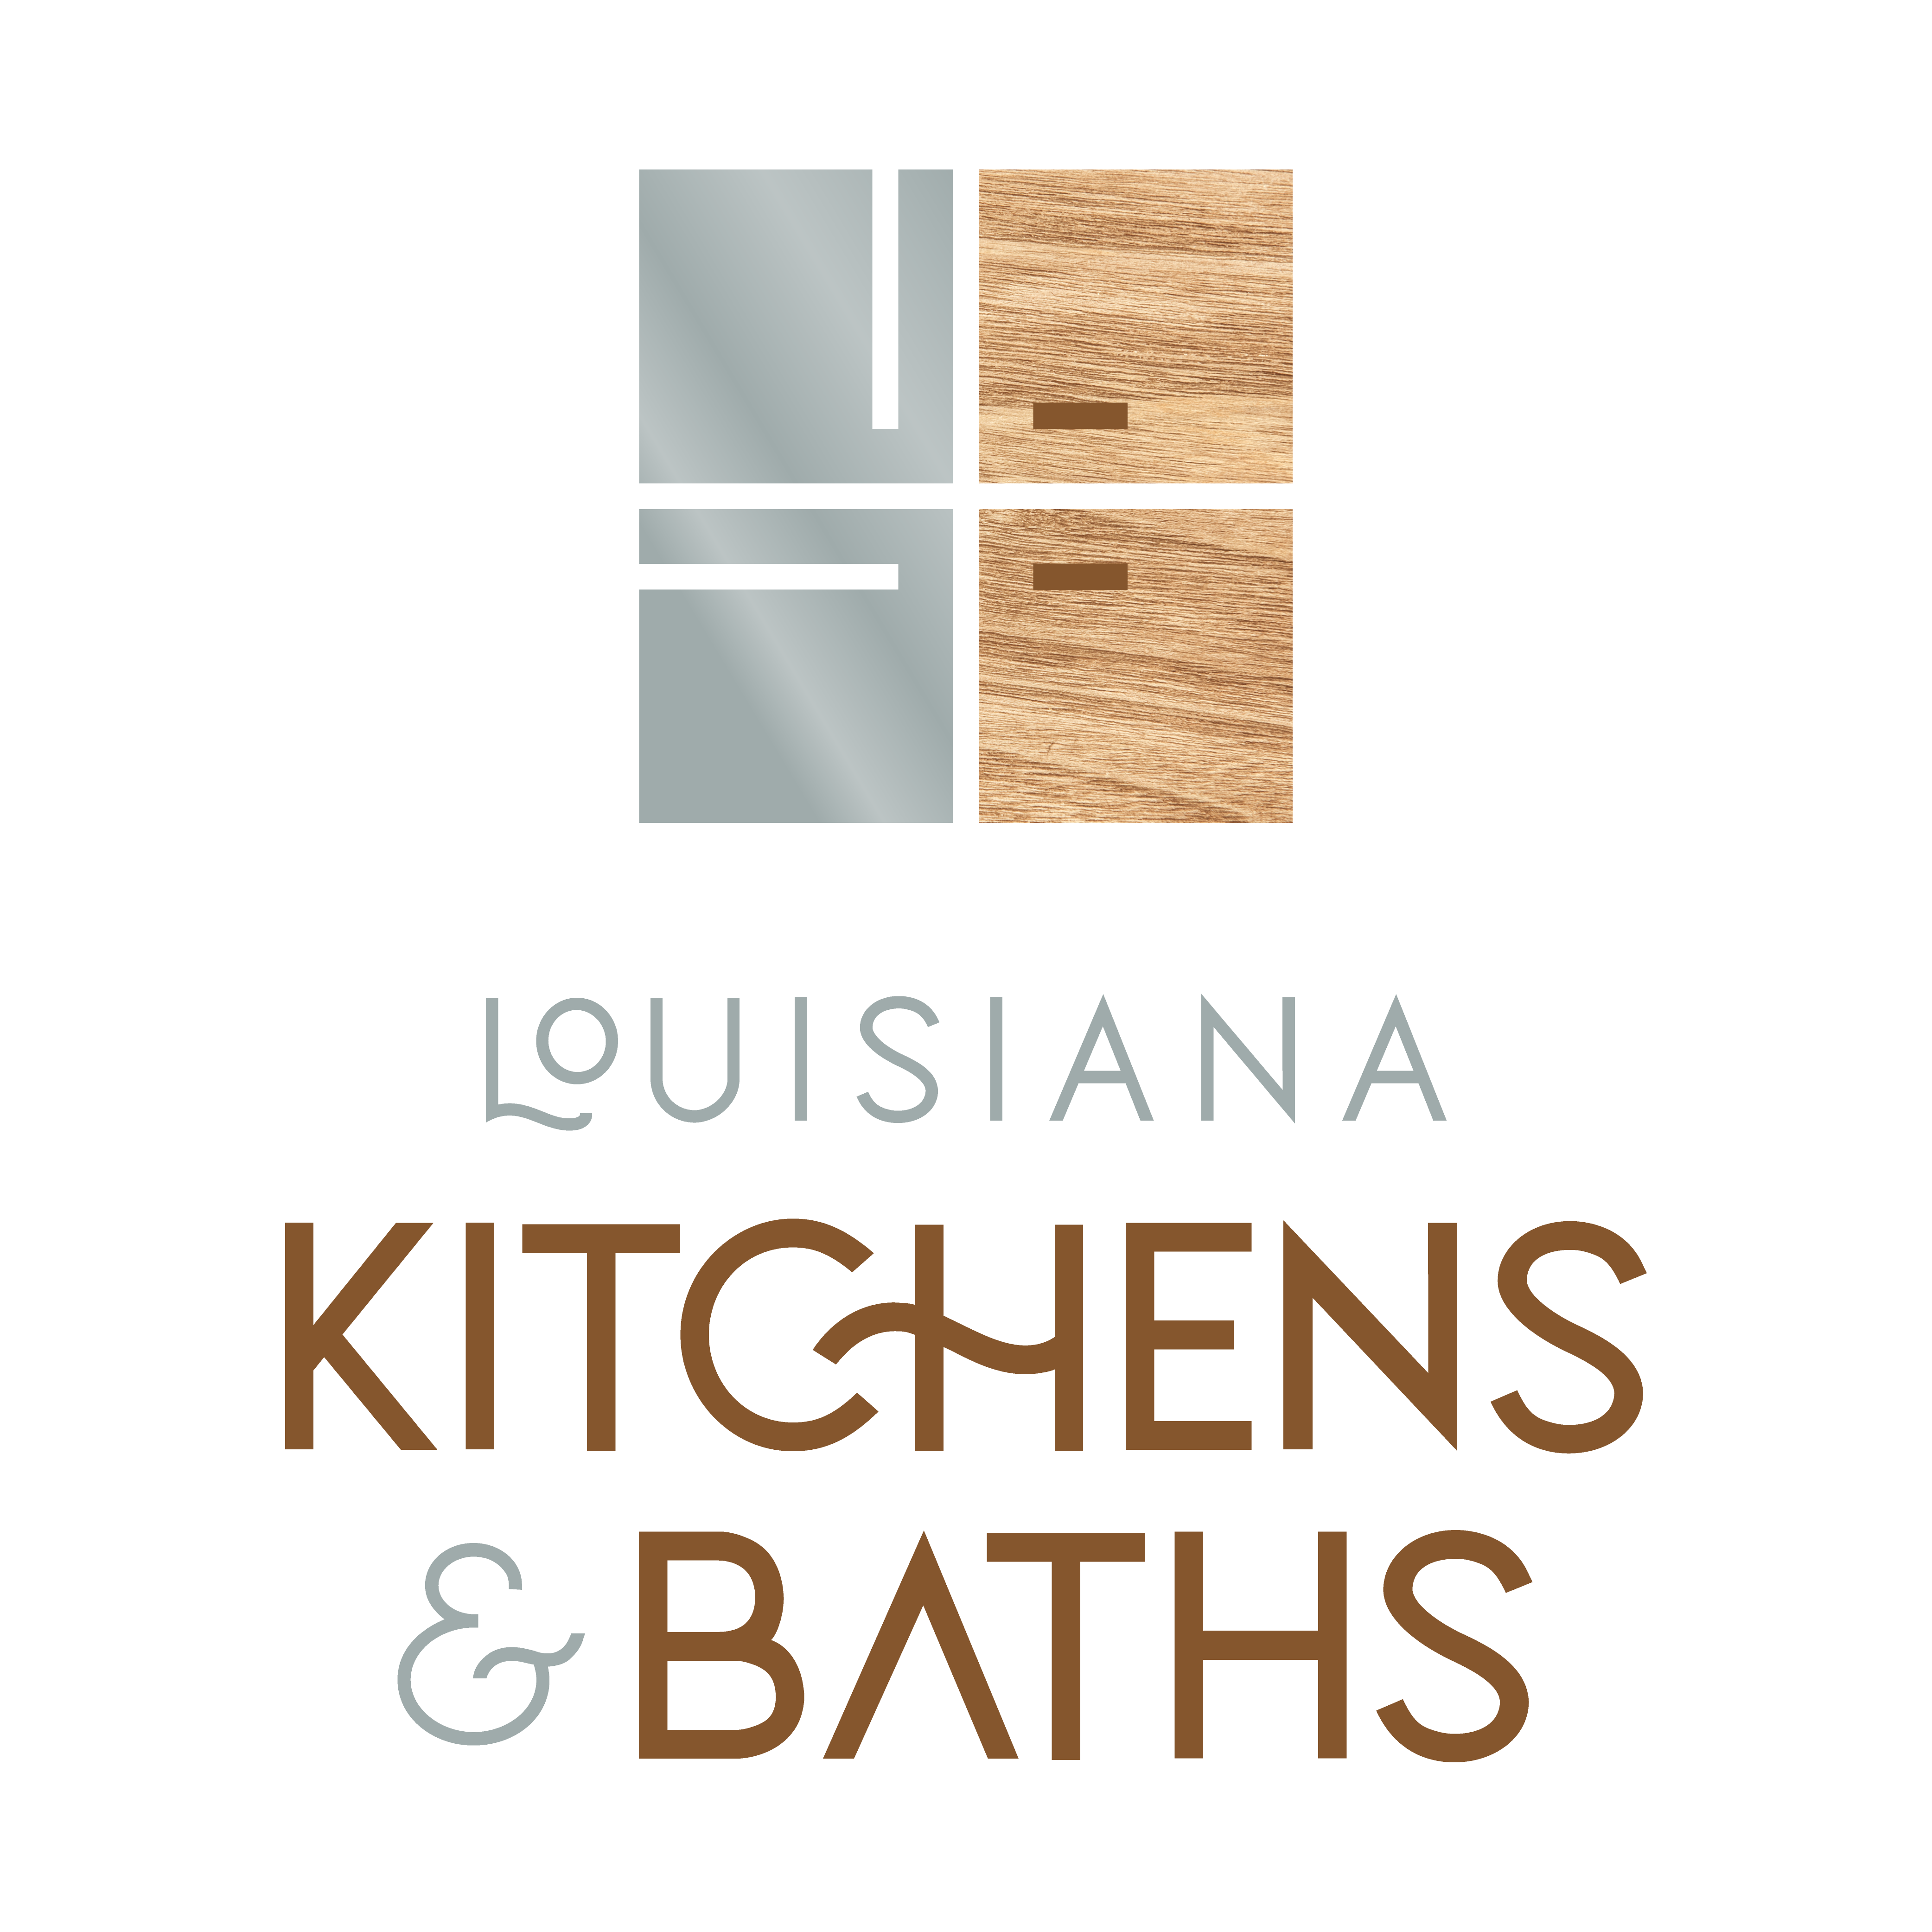 Louisiana Kitchens & Baths logo design by logo designer Freshwater Design for your inspiration and for the worlds largest logo competition